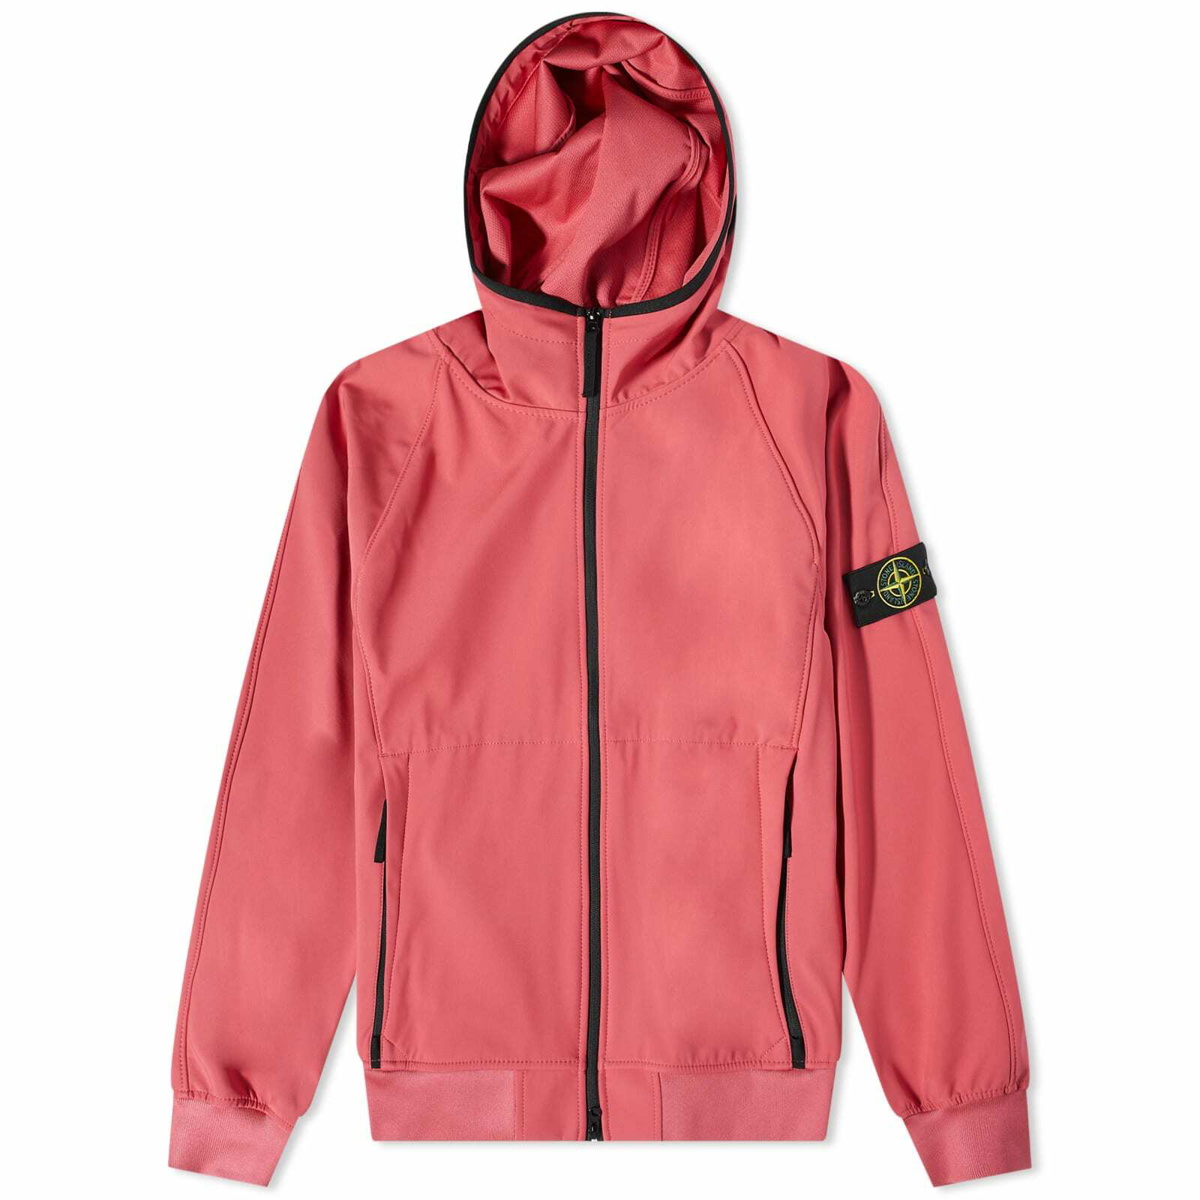 Stone Island Men's Light Soft Shell-R Hooded Jacket in Fucsia